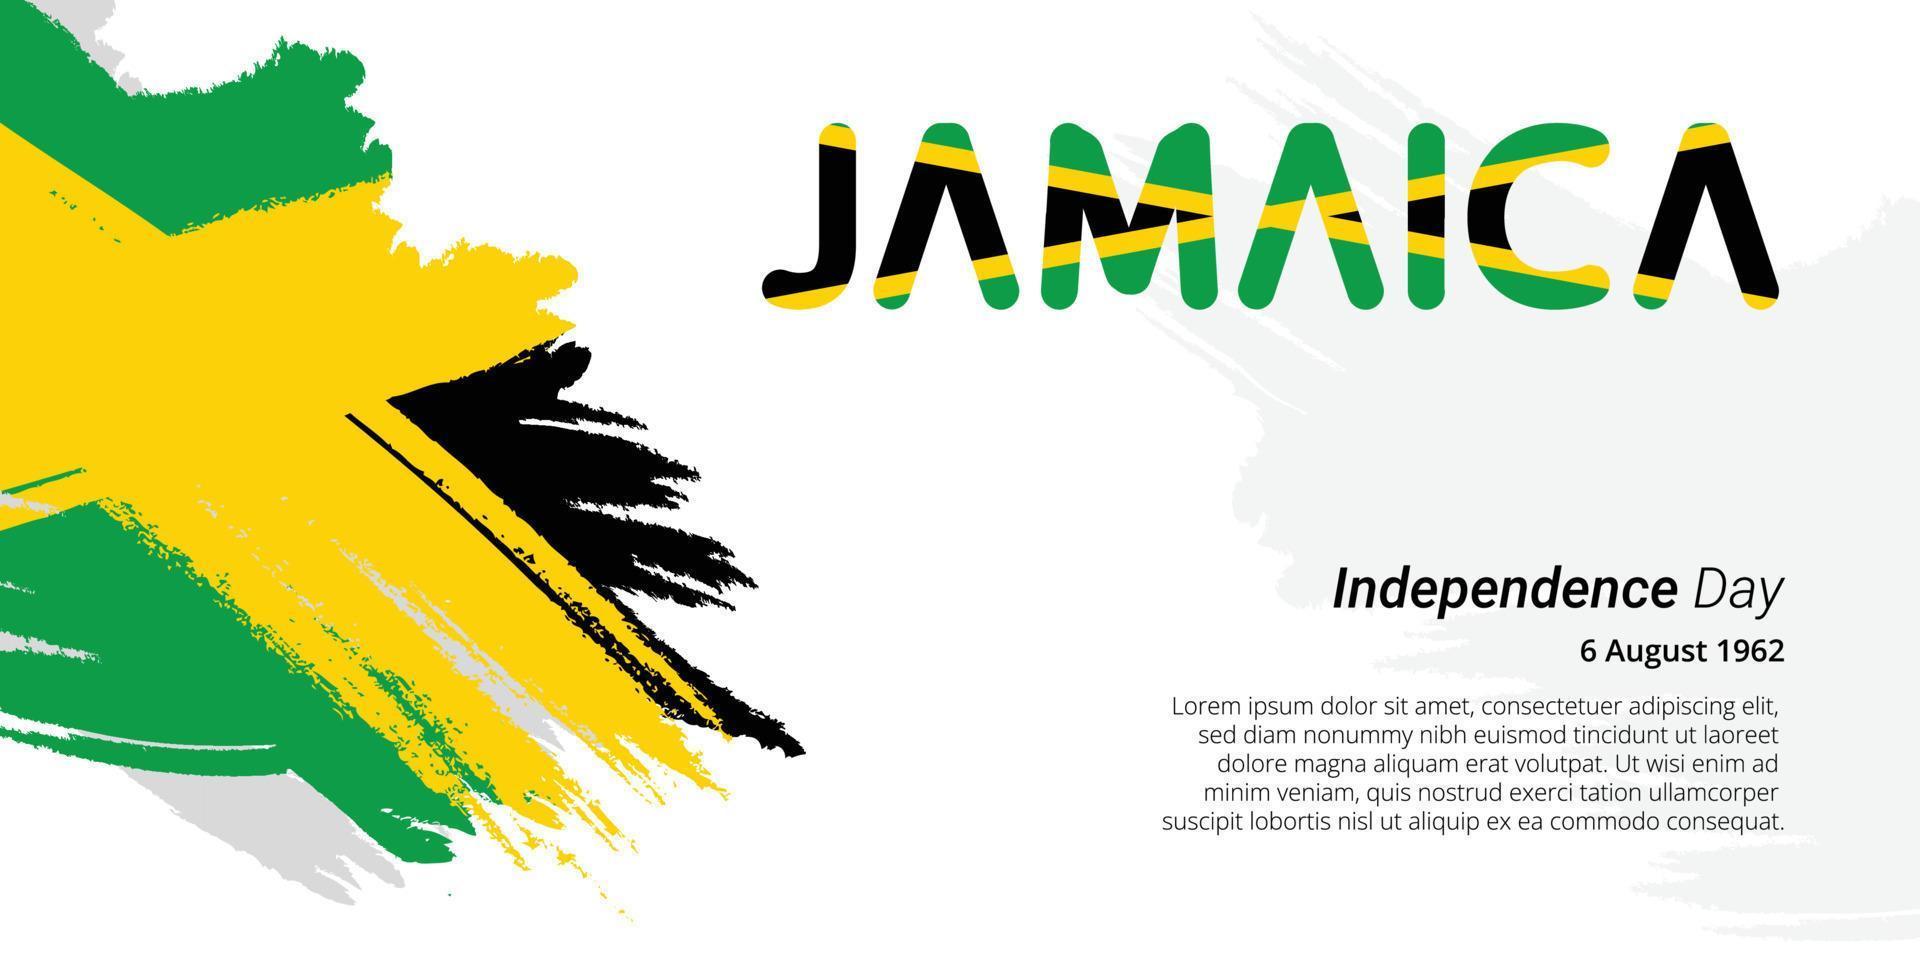 jamaica independence day banner background vector